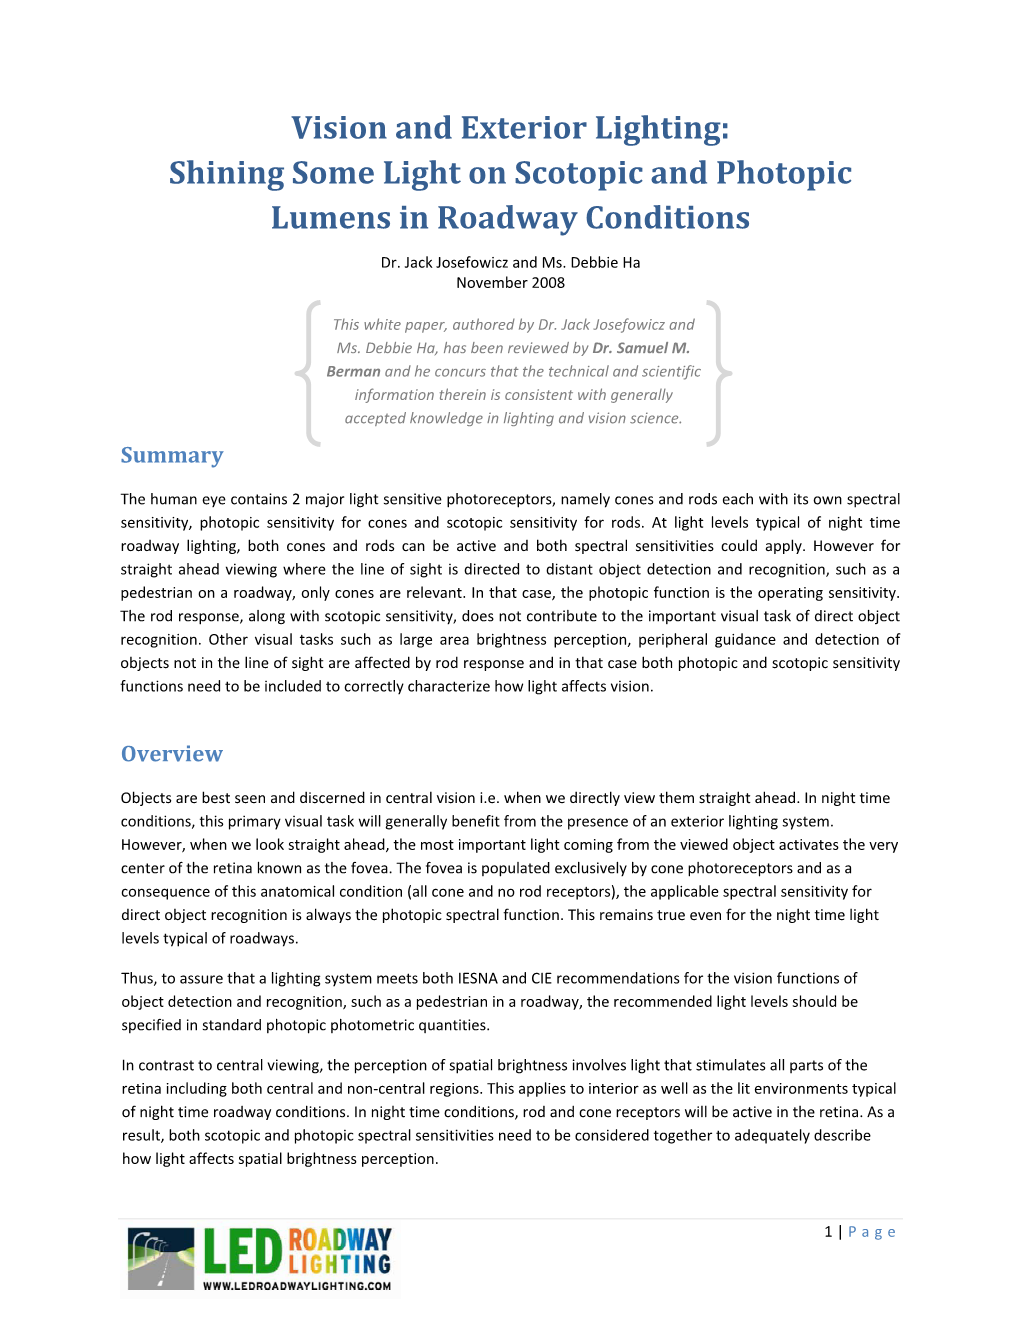 Vision and Exterior Lighting: Shining Some Light on Scotopic and Photopic Lumens in Roadway Conditions